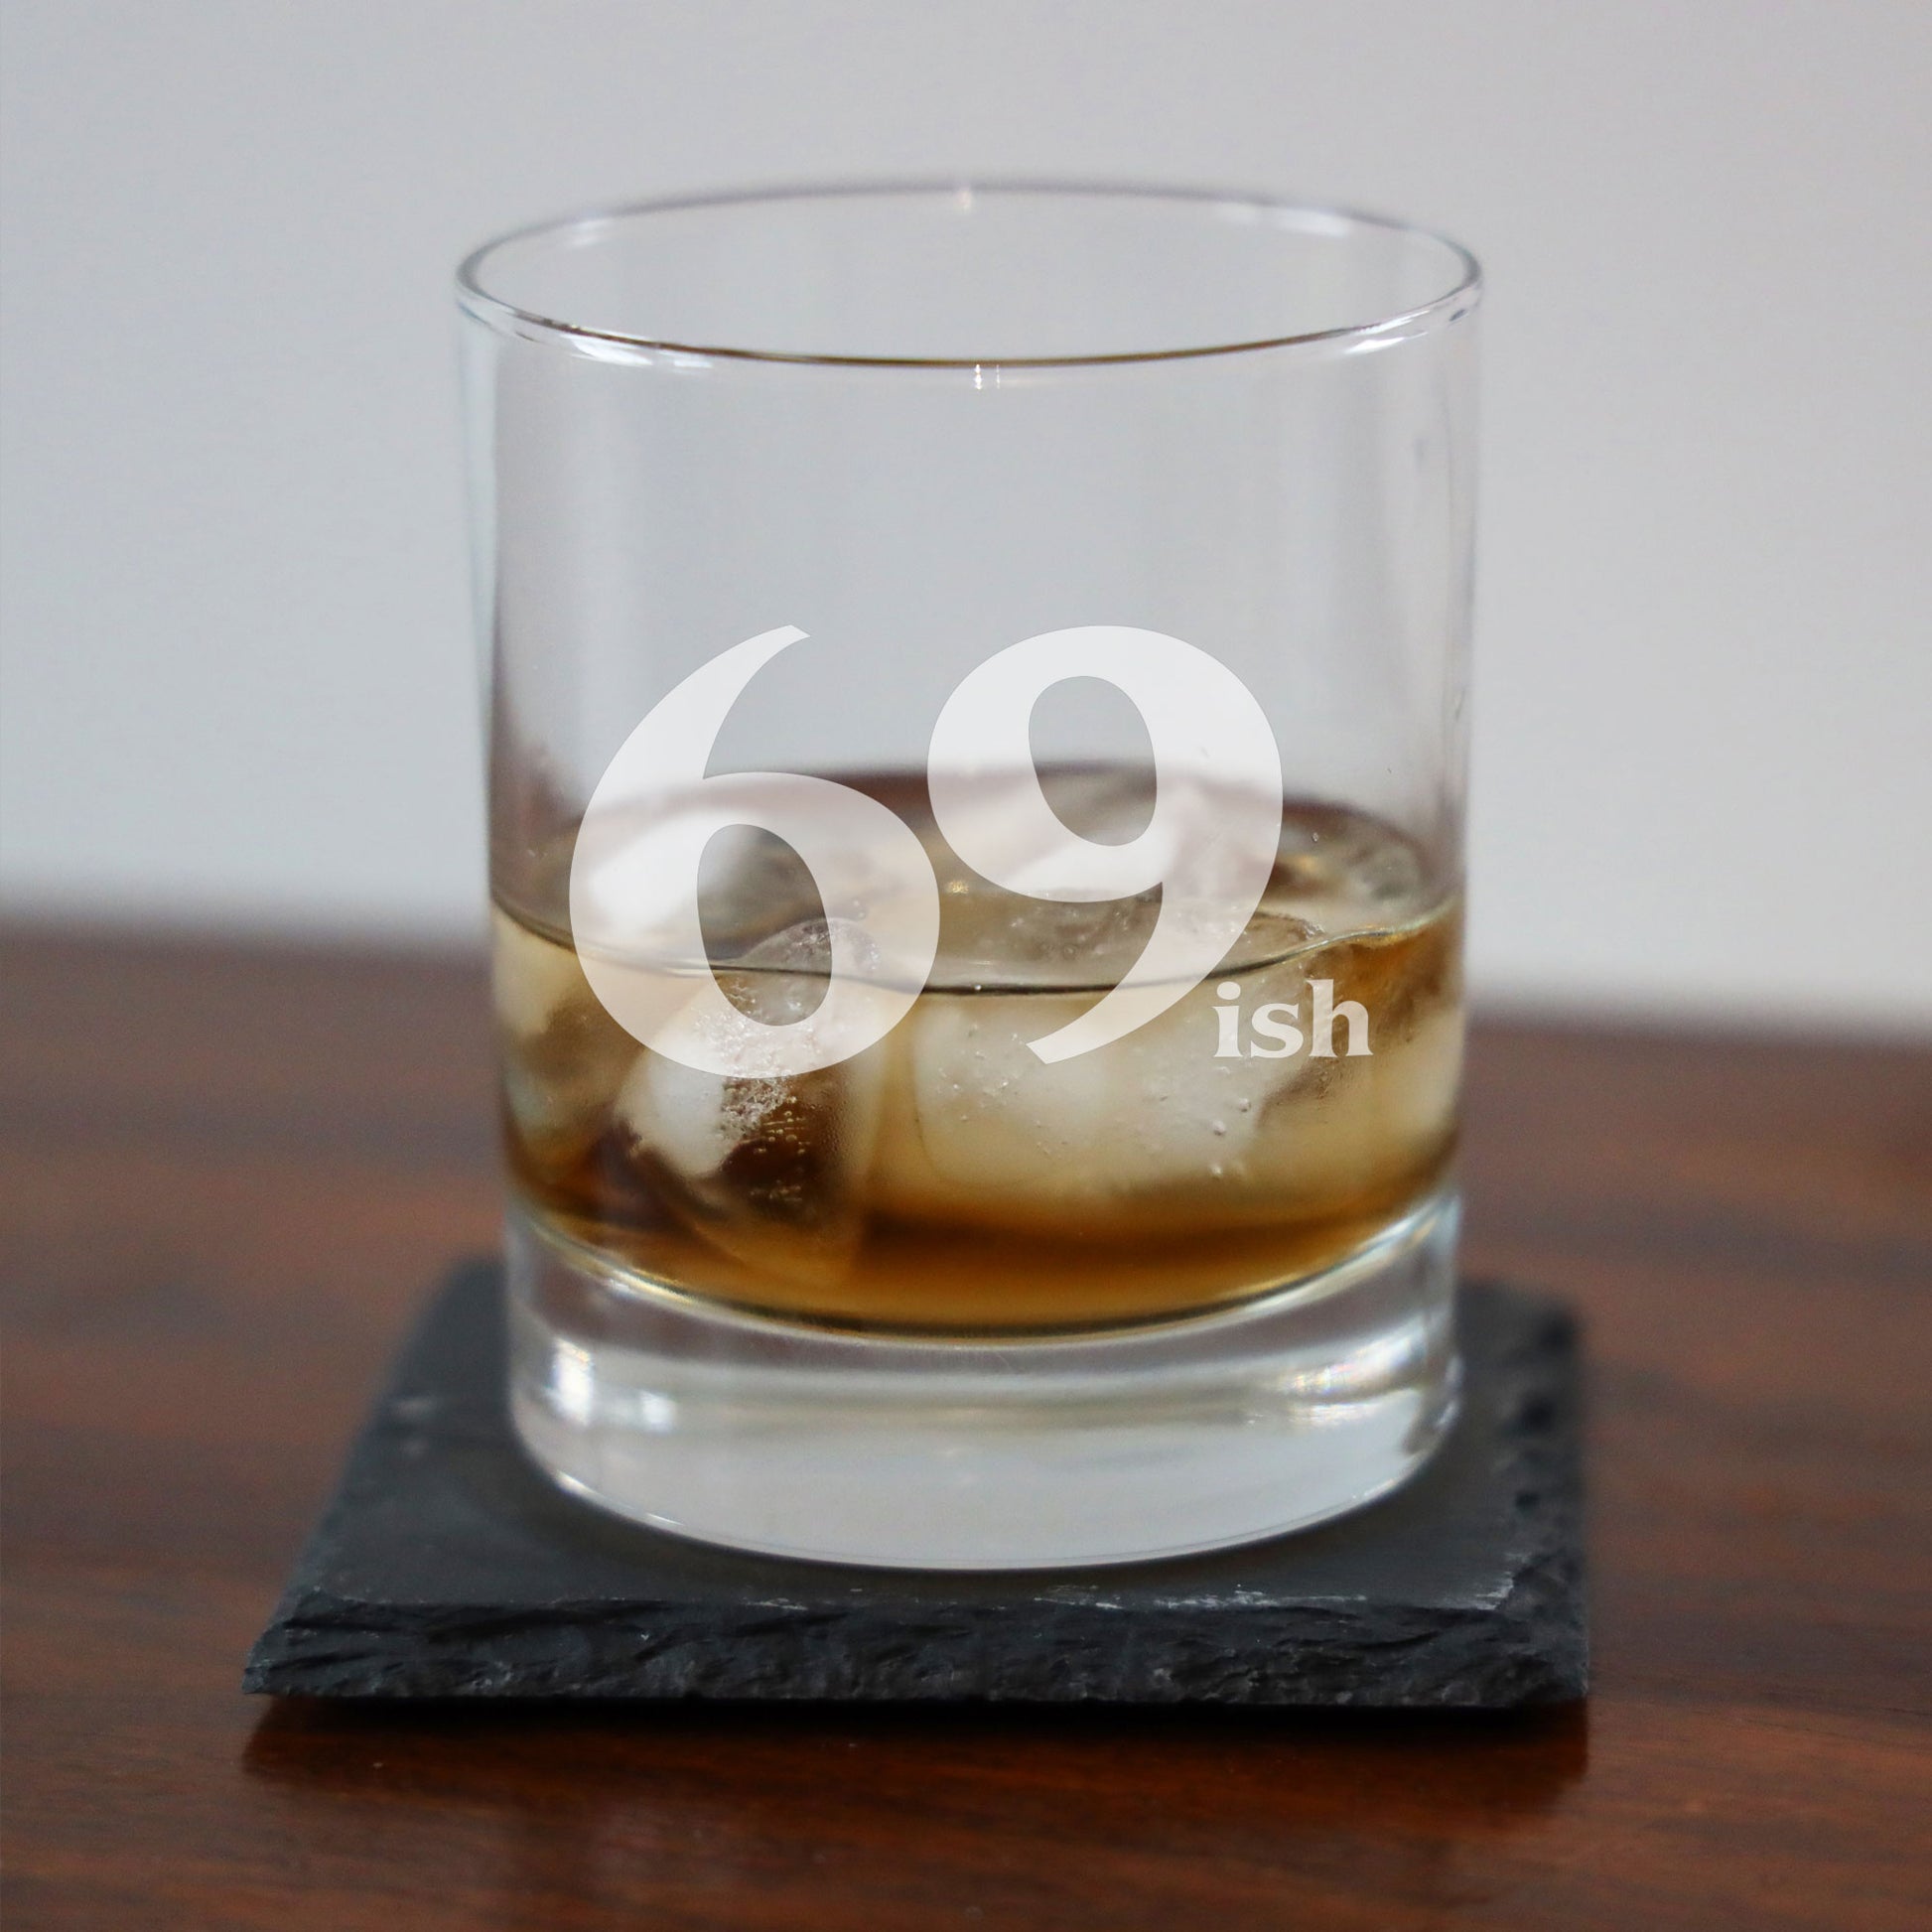 69ish Whisky Glass and/or Coaster Set  - Always Looking Good -   